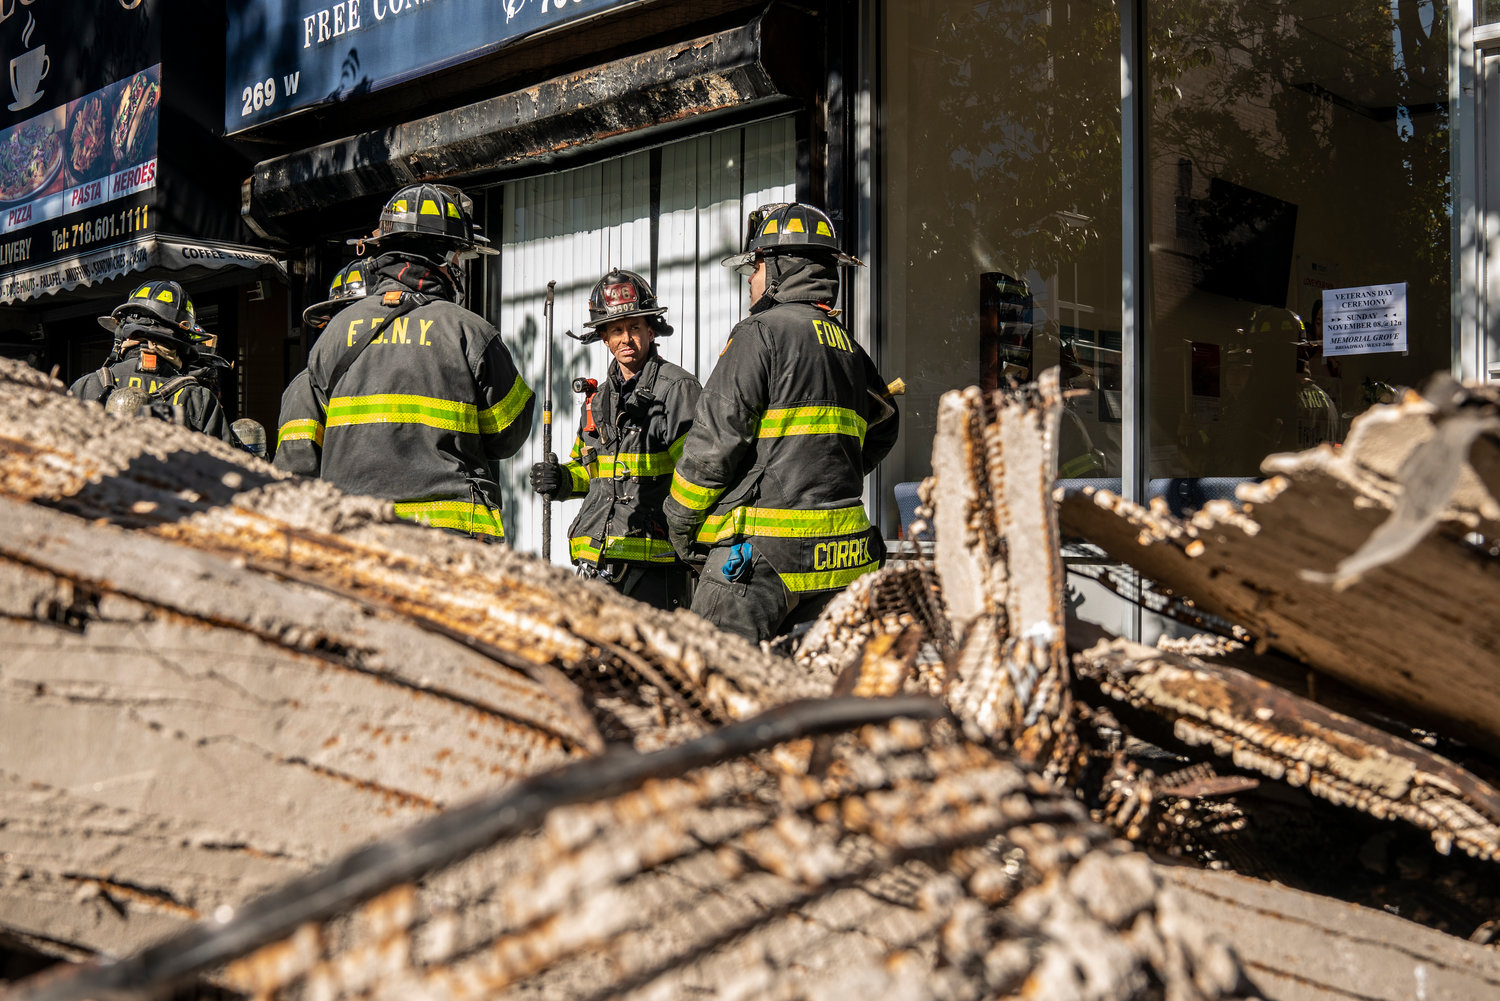 New York firefighters take a moment to assess the rubble they pulled out of the Picture Perfect Frames store at 267 W. 231st St. The wire lath and plaster ceiling fell Monday, burying its owners, Nohad and Samia Jourdy. Luckily, both escaped serious injury.